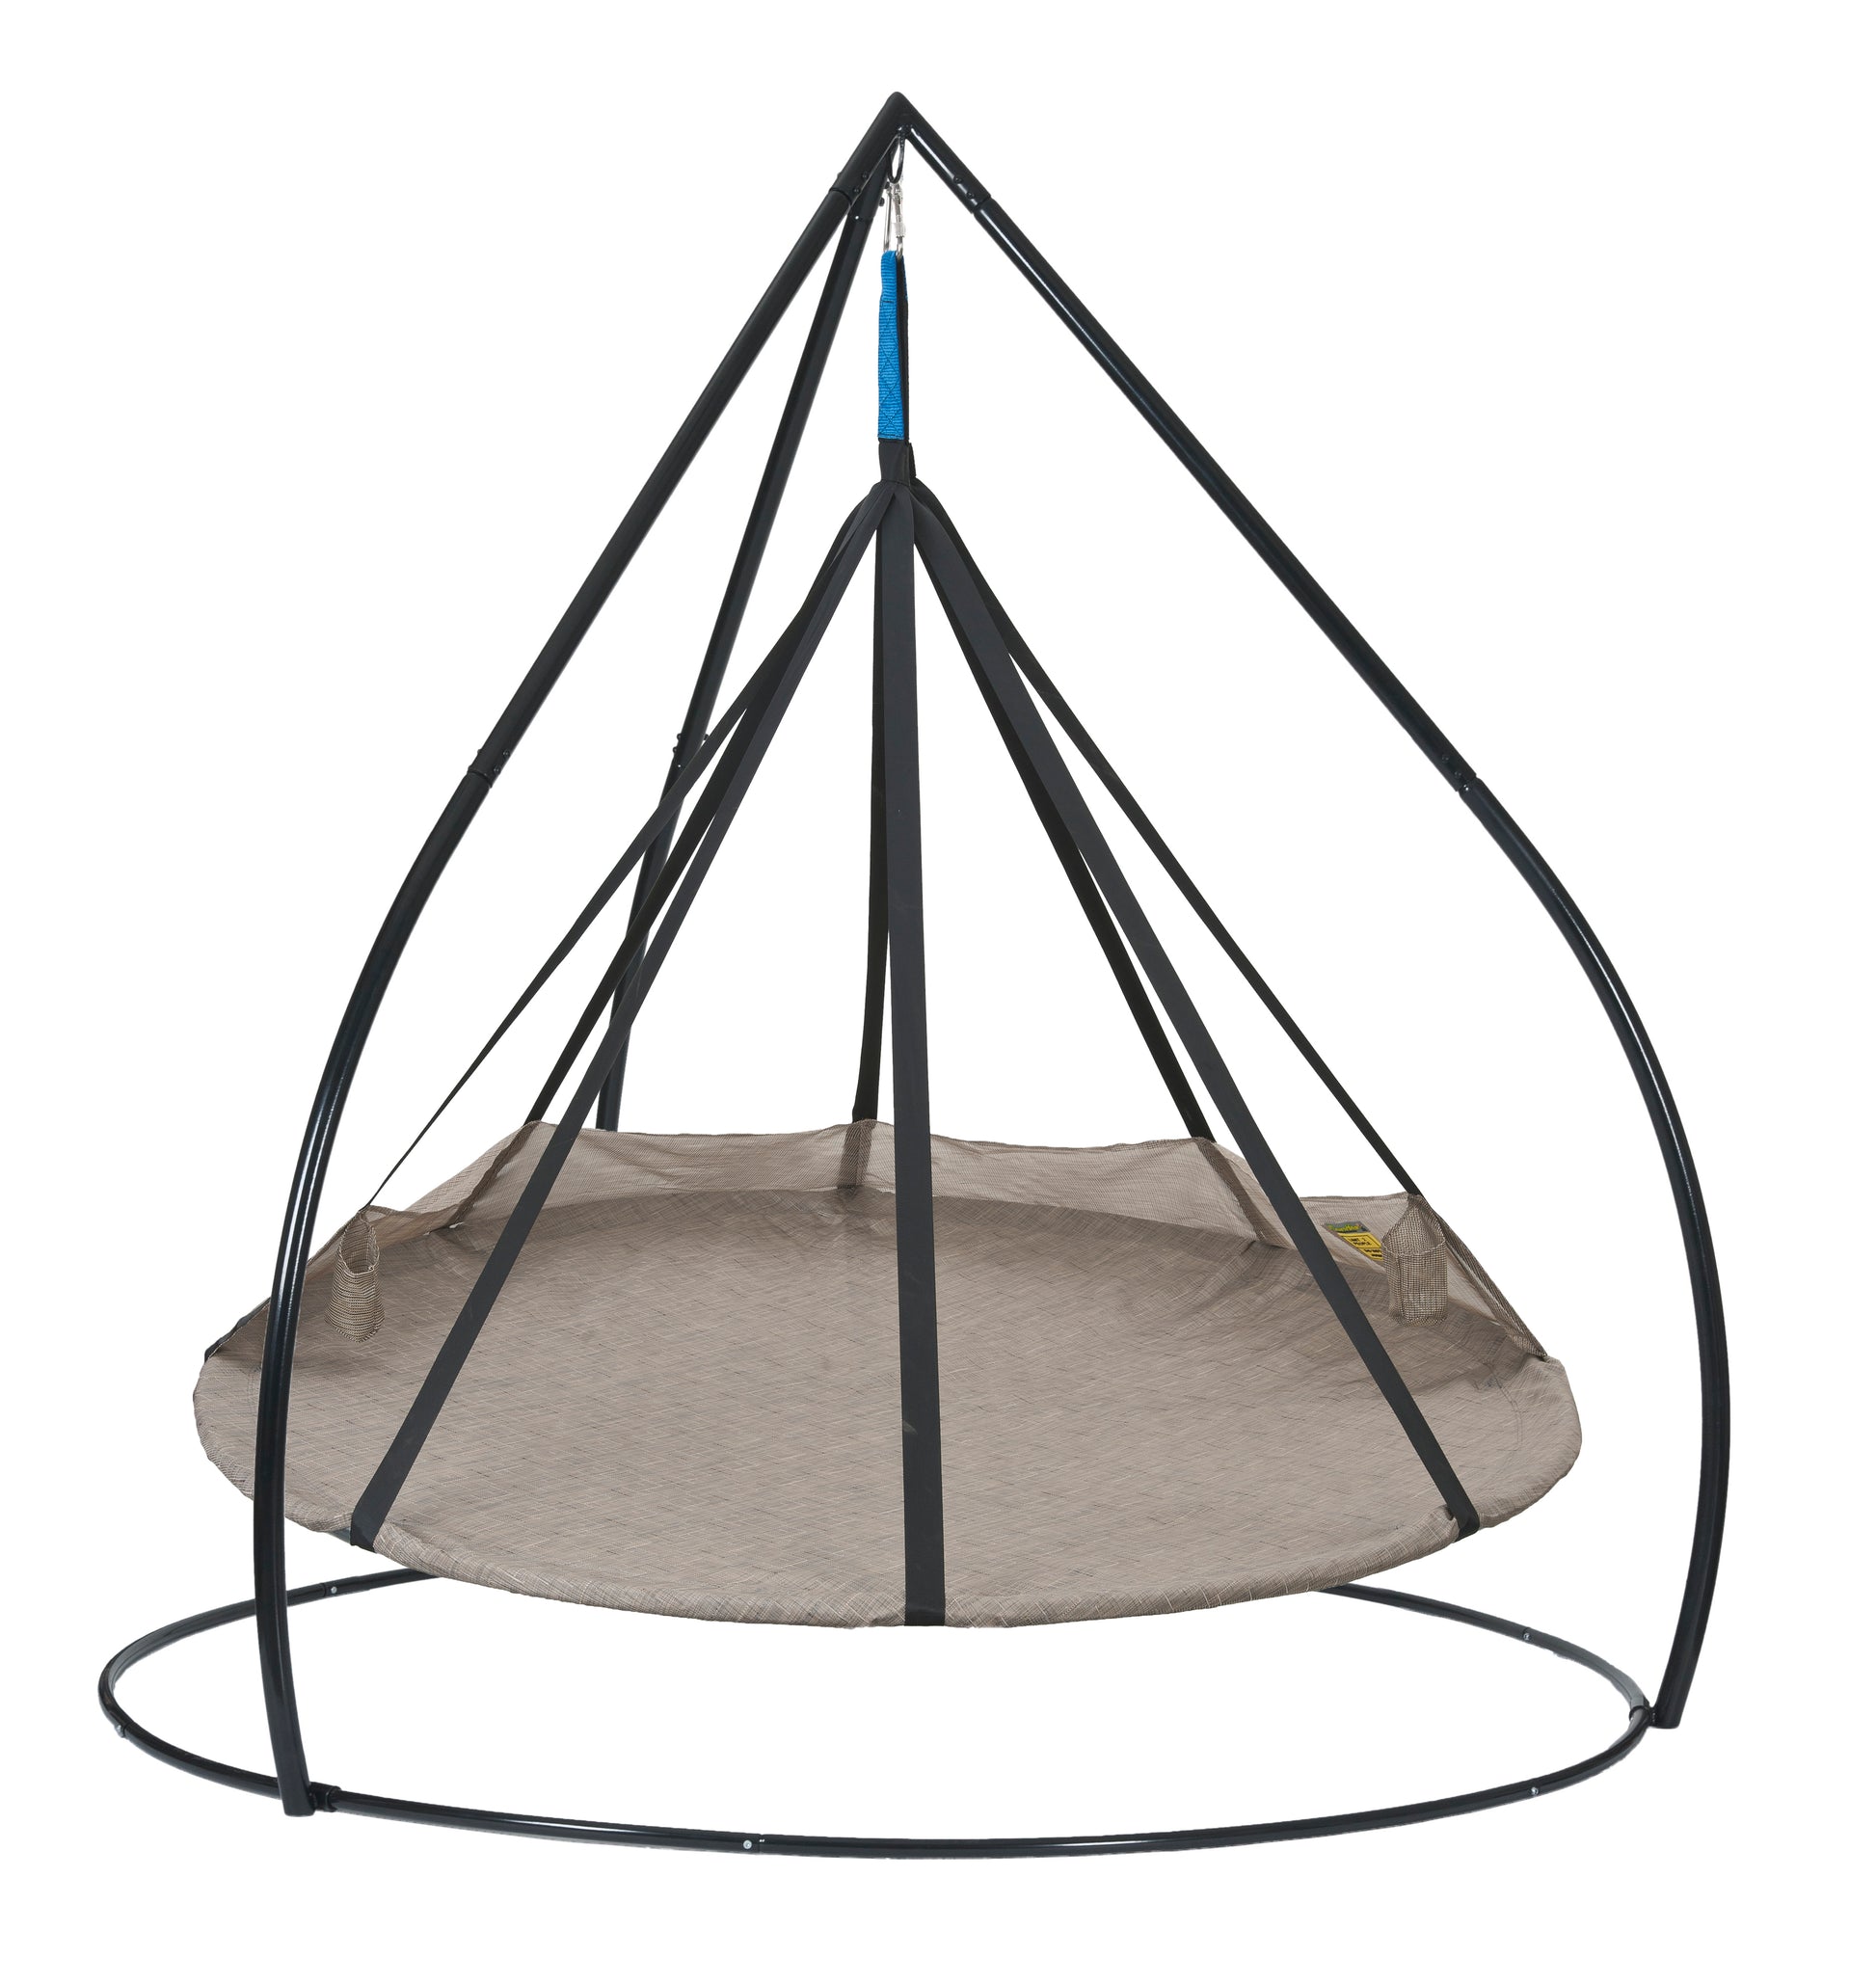 FlowerHouse Hanging Hammock Flying Saucer with Stand - view with stand and saucer connected